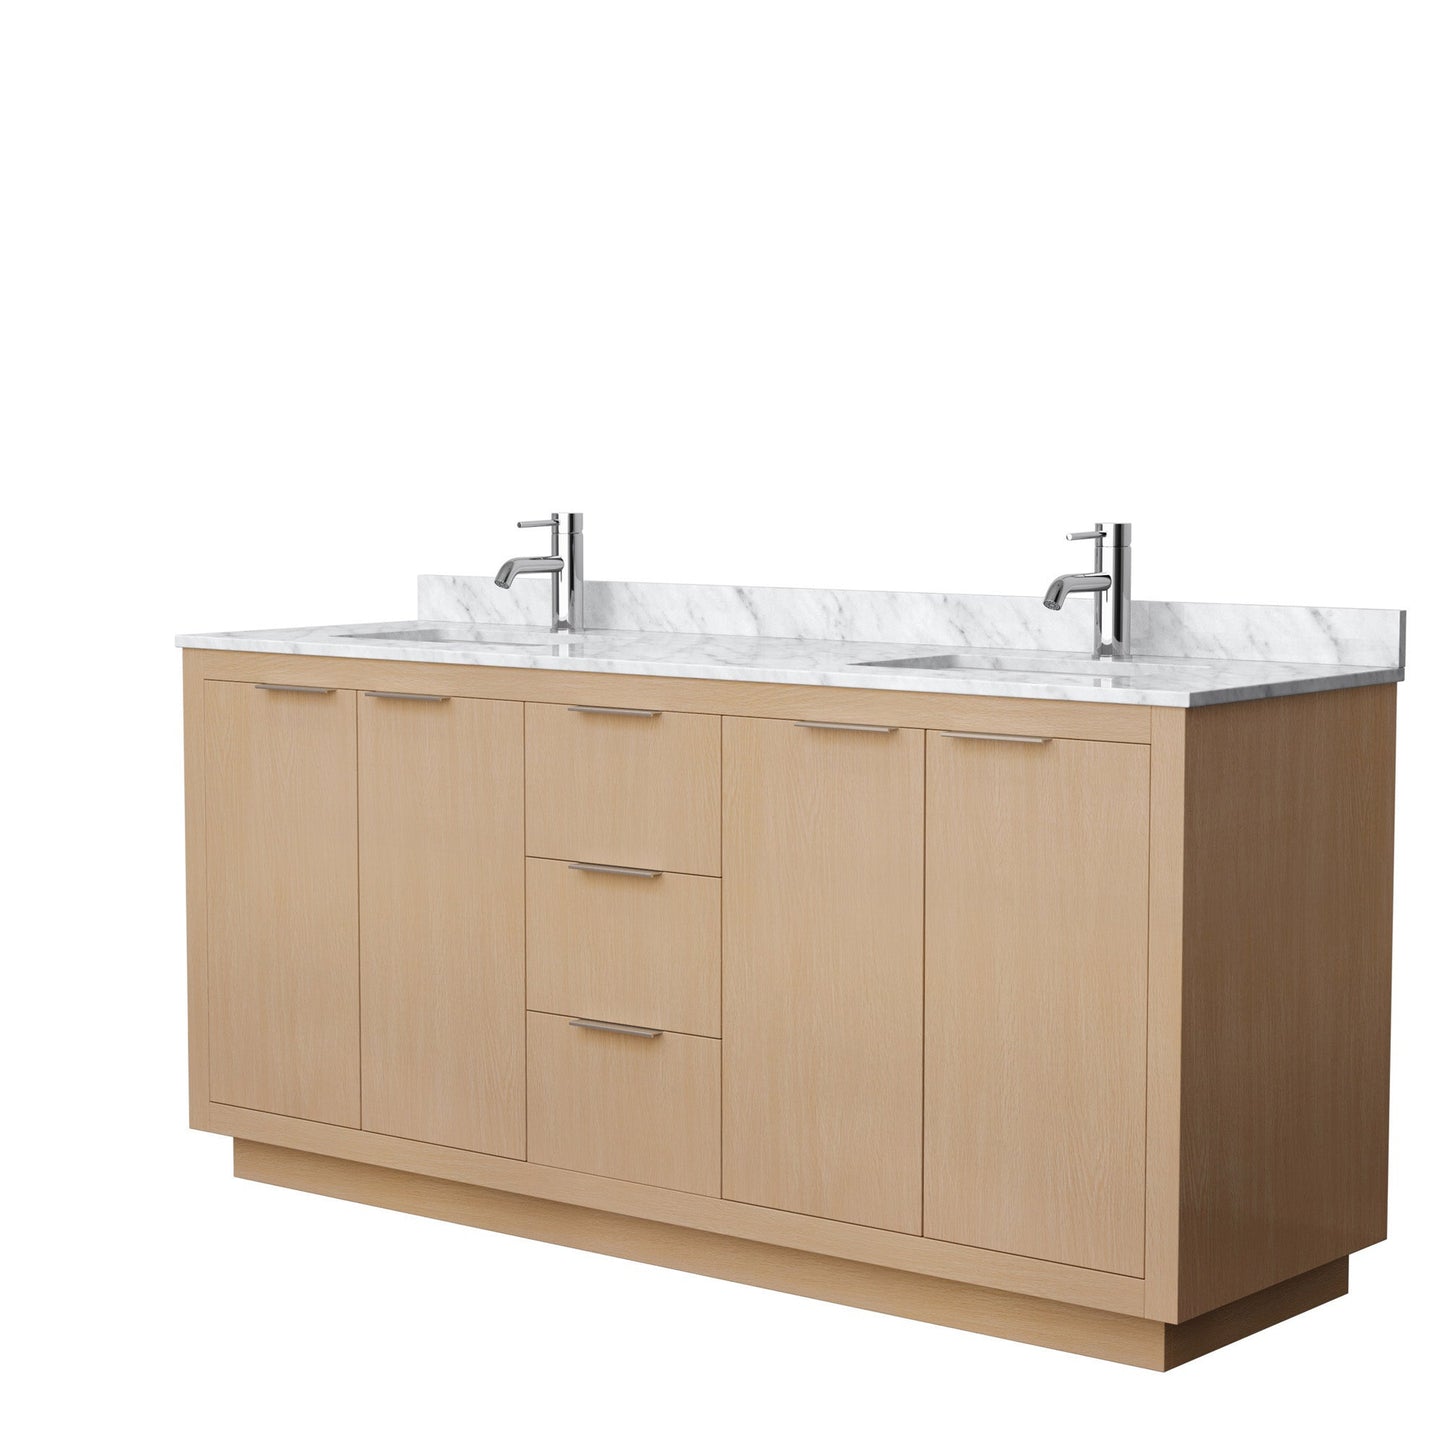 Wyndham Collection Maroni 72" Double Bathroom Vanity in Light Straw, White Carrara Marble Countertop, Undermount Square Sinks